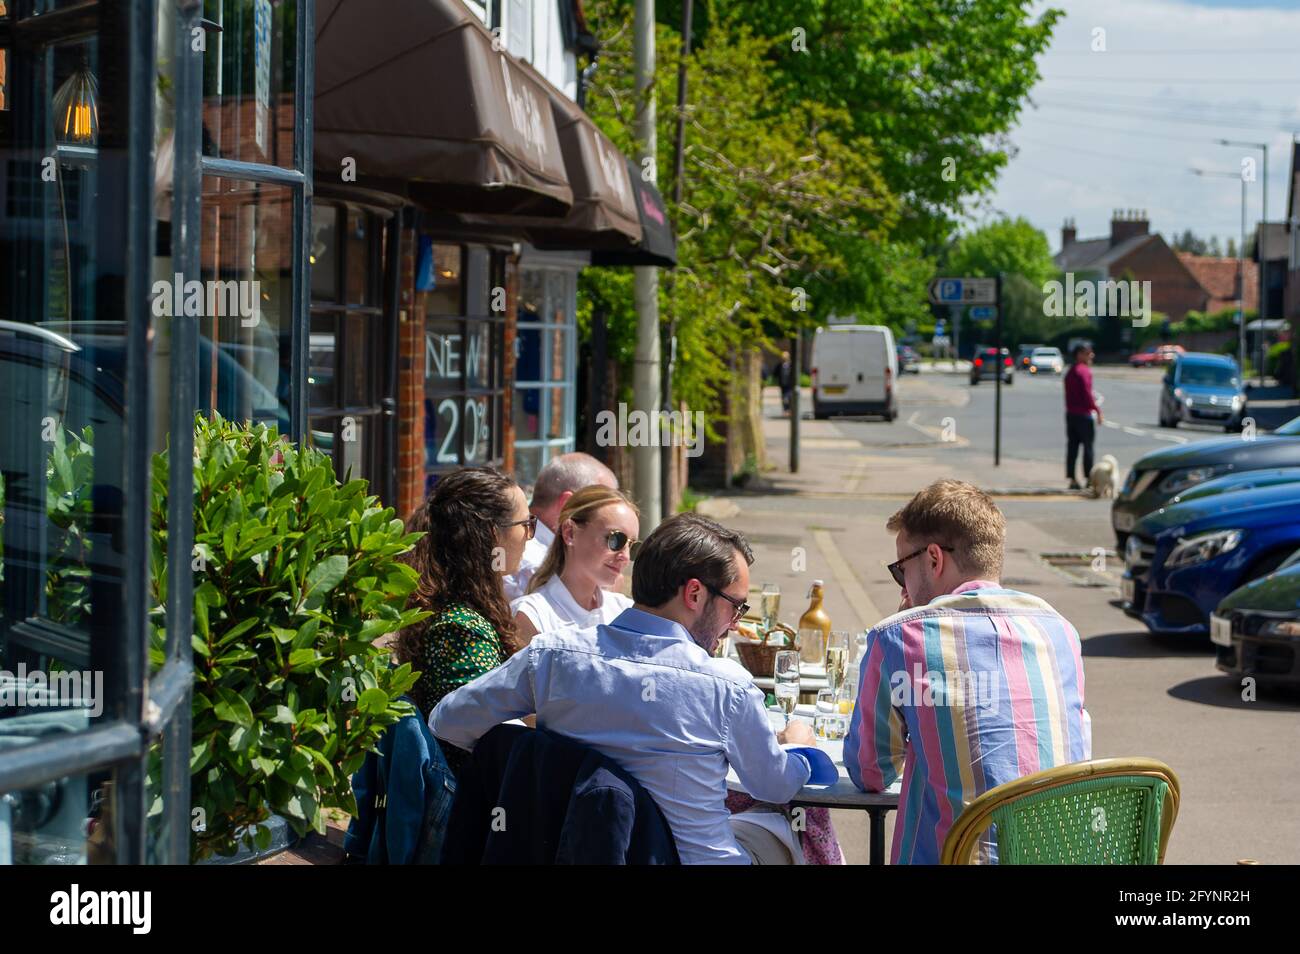 Old Amersham, Buckinghamshire, UK. 29th May, 2021. Customers enjoying a spot of lunch Al Fresco at Cote Brasserie. People were out enjoying the beautiful warm sunshine today in Amersham Old Town following the lifting of more of the Covid-19 restrictions. Credit: Maureen McLean/Alamy Live News Stock Photo